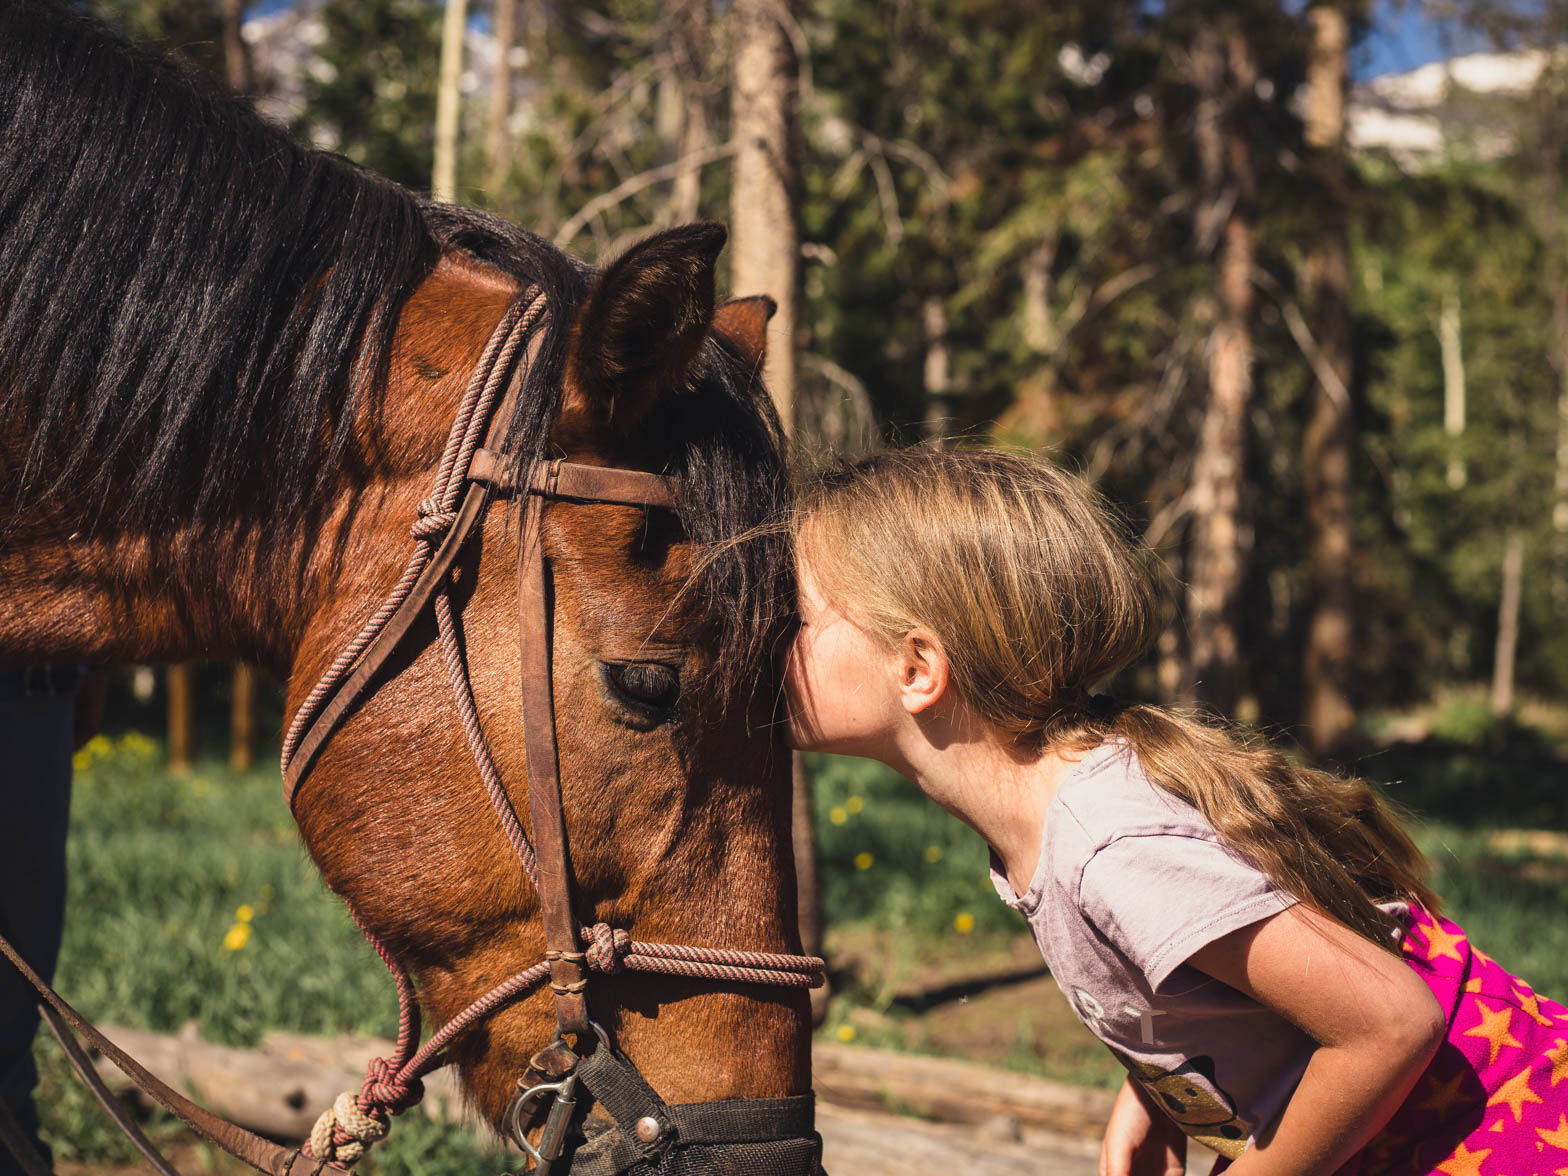 A little girl resting her head on a horse.